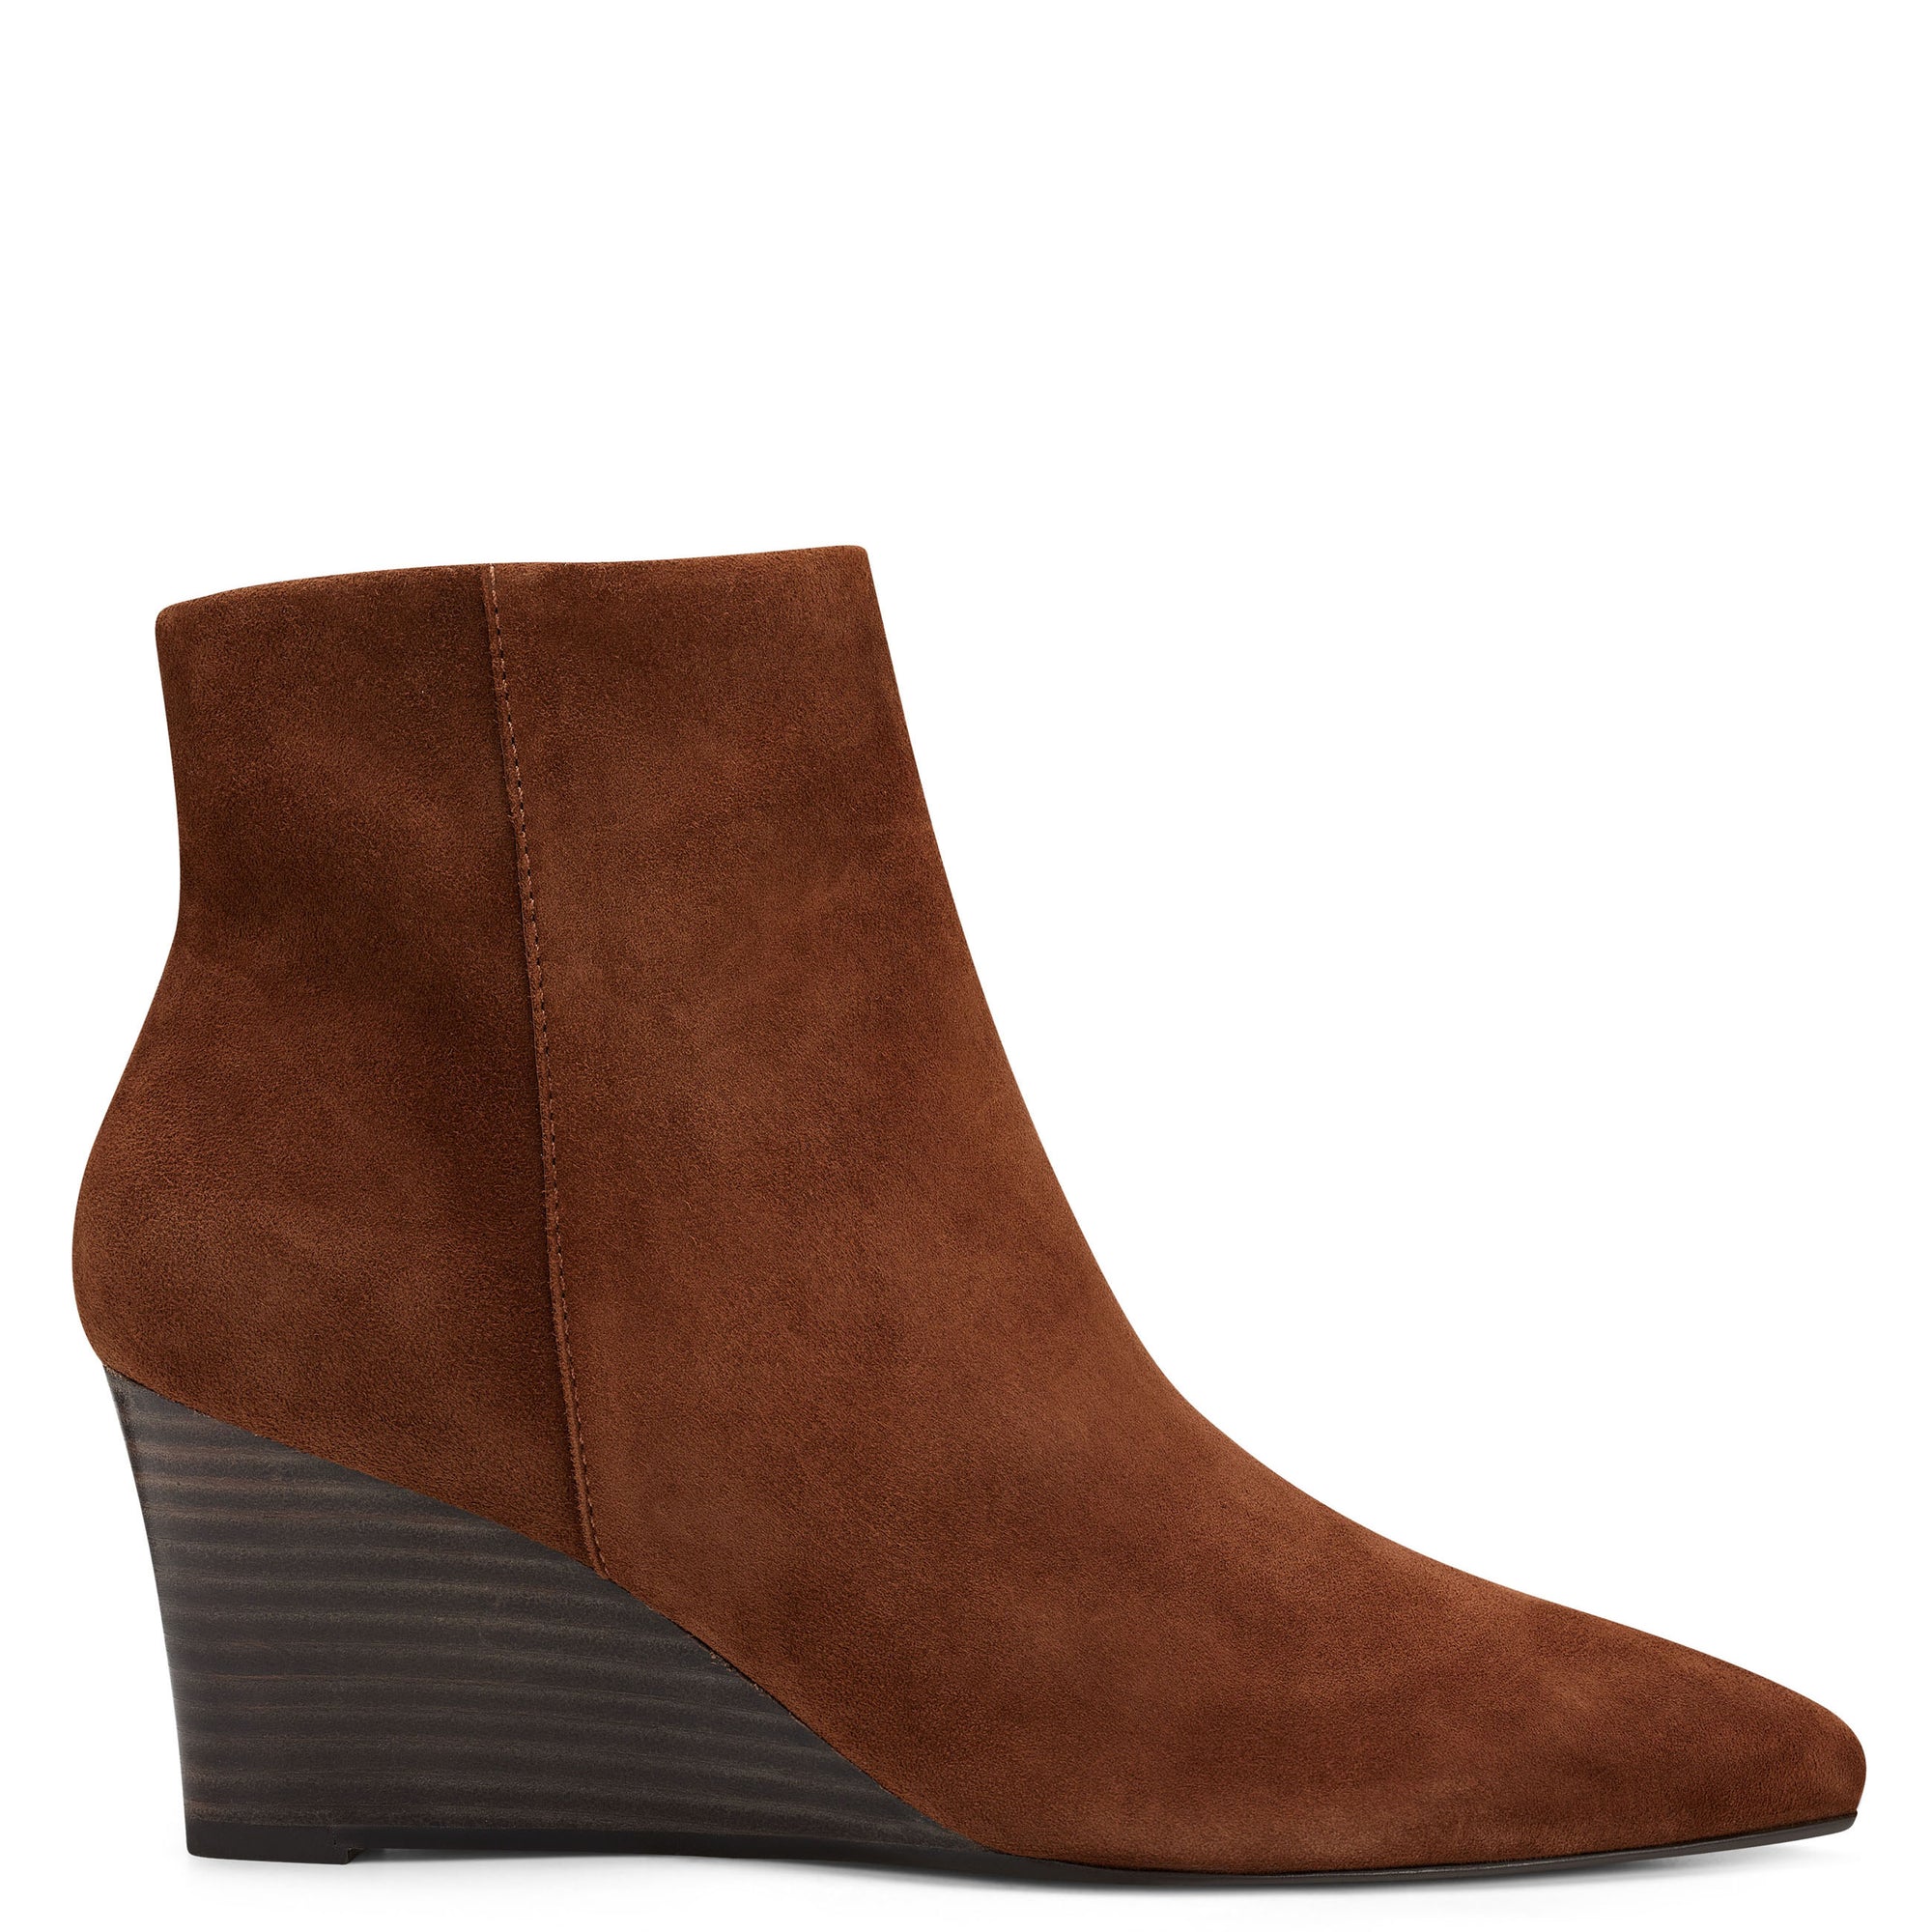 wedge booties cheap